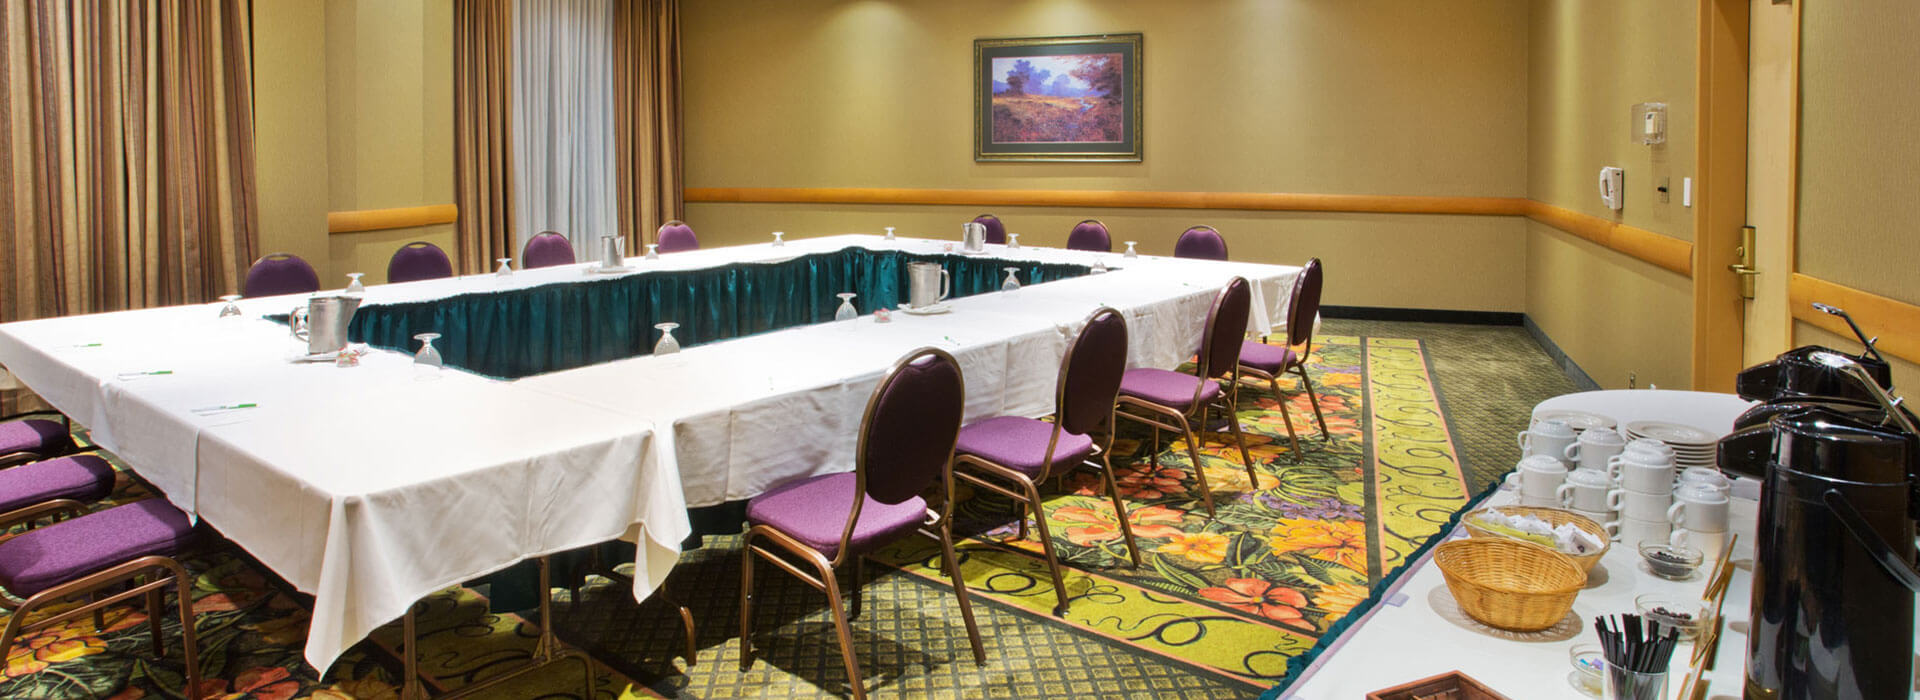 Seymour conference and meeting room at the Holiday Inn North Vancouver